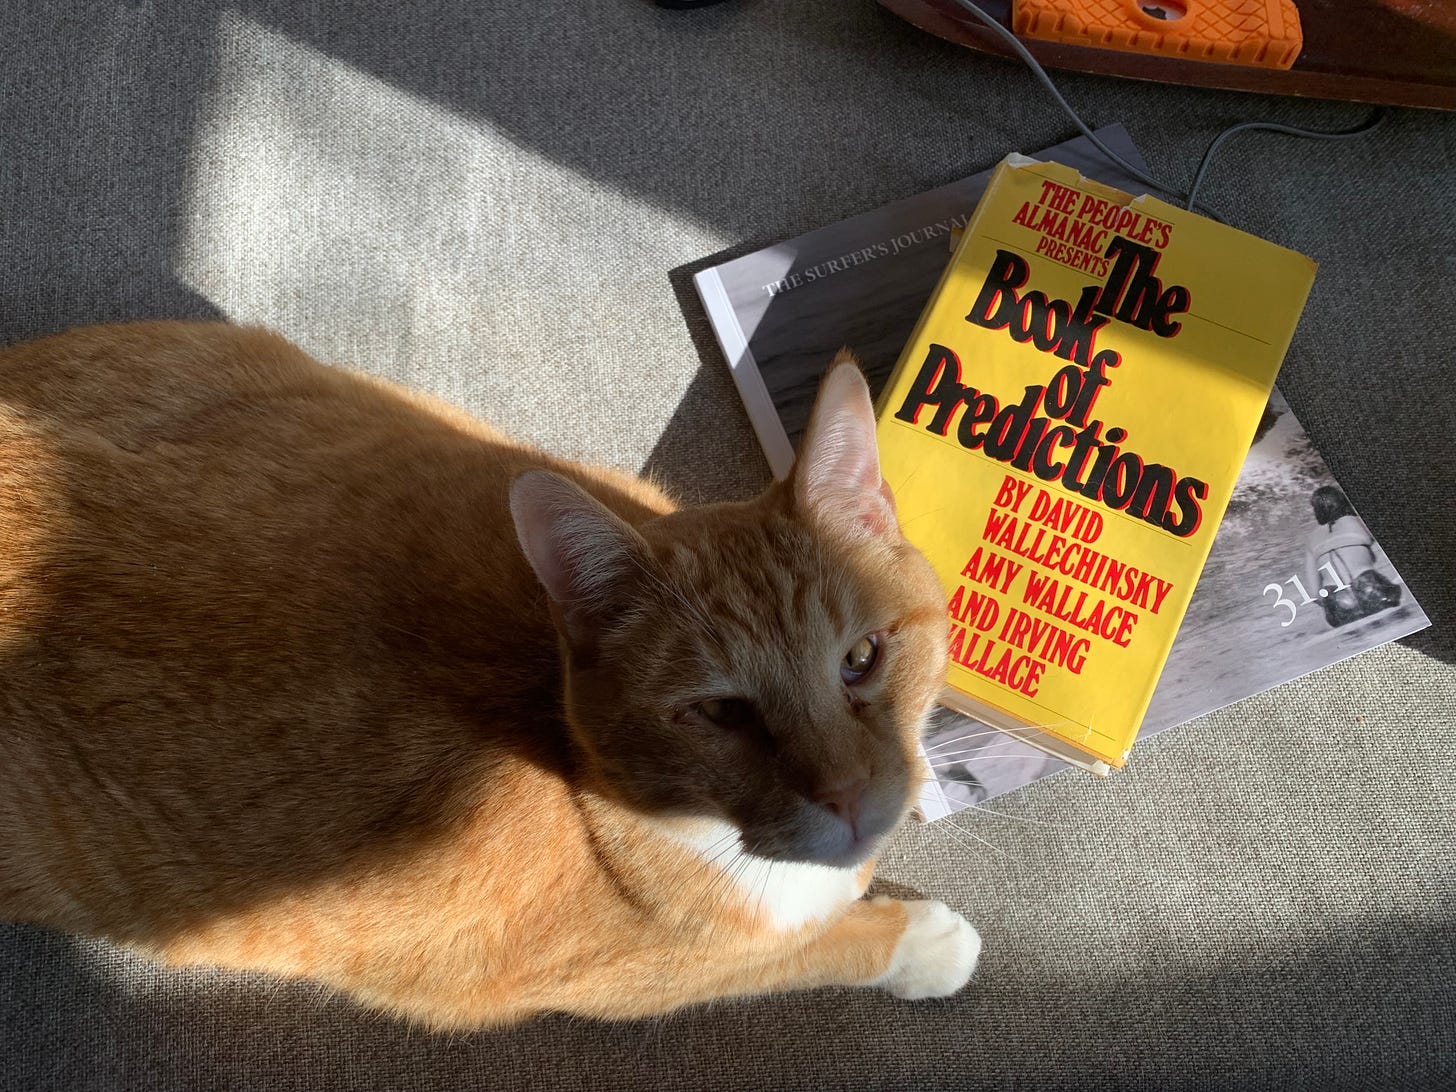 An orange cat laying next to a book called "the Book of Predictions"